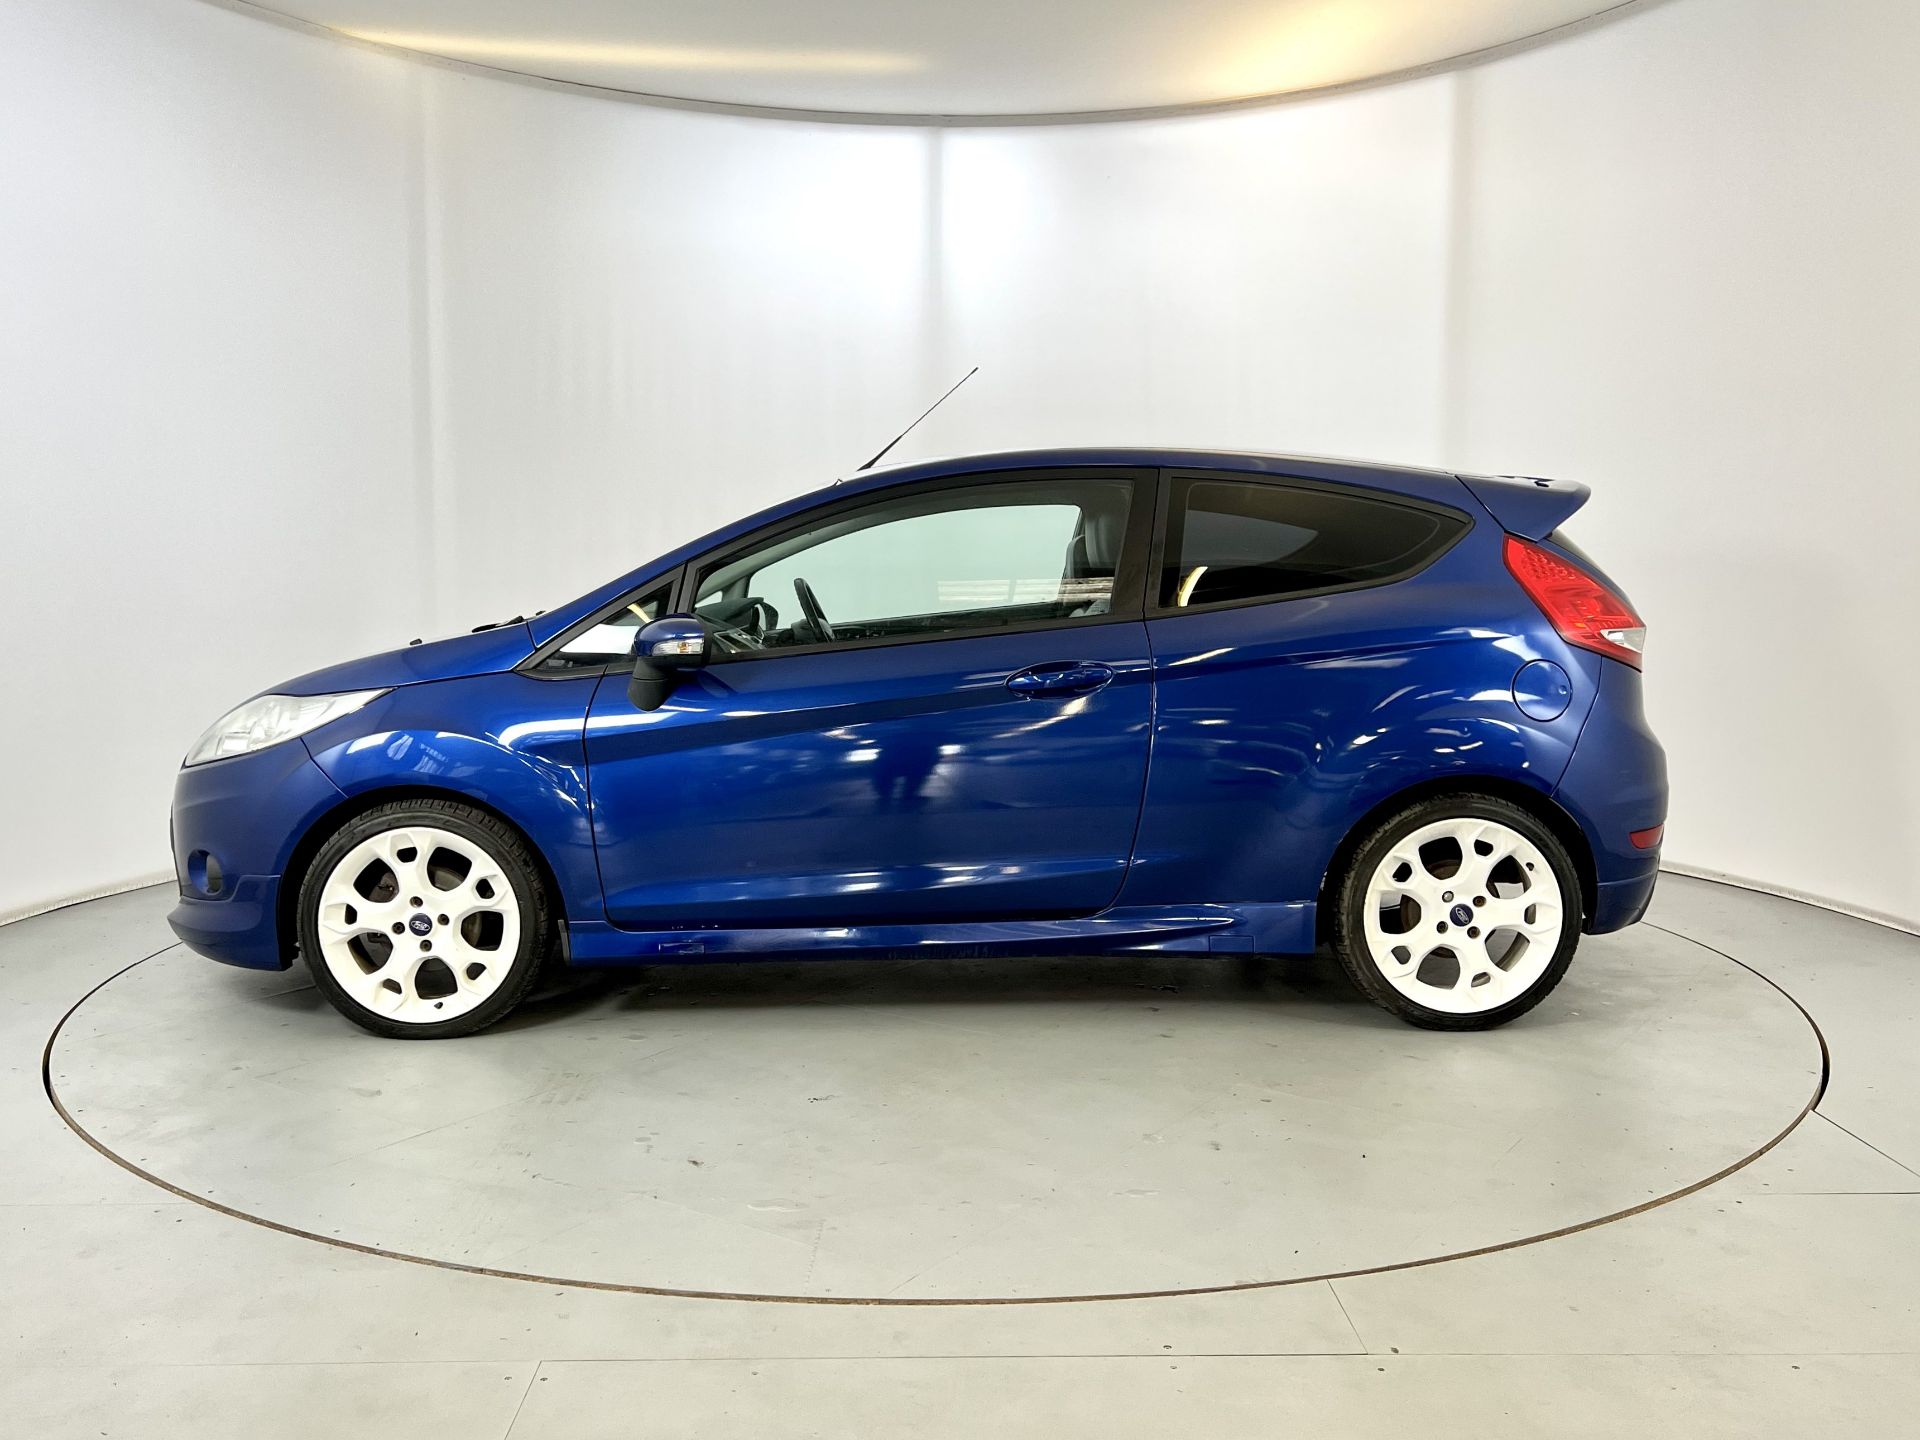 Ford Fiesta S1600 - Image 5 of 30